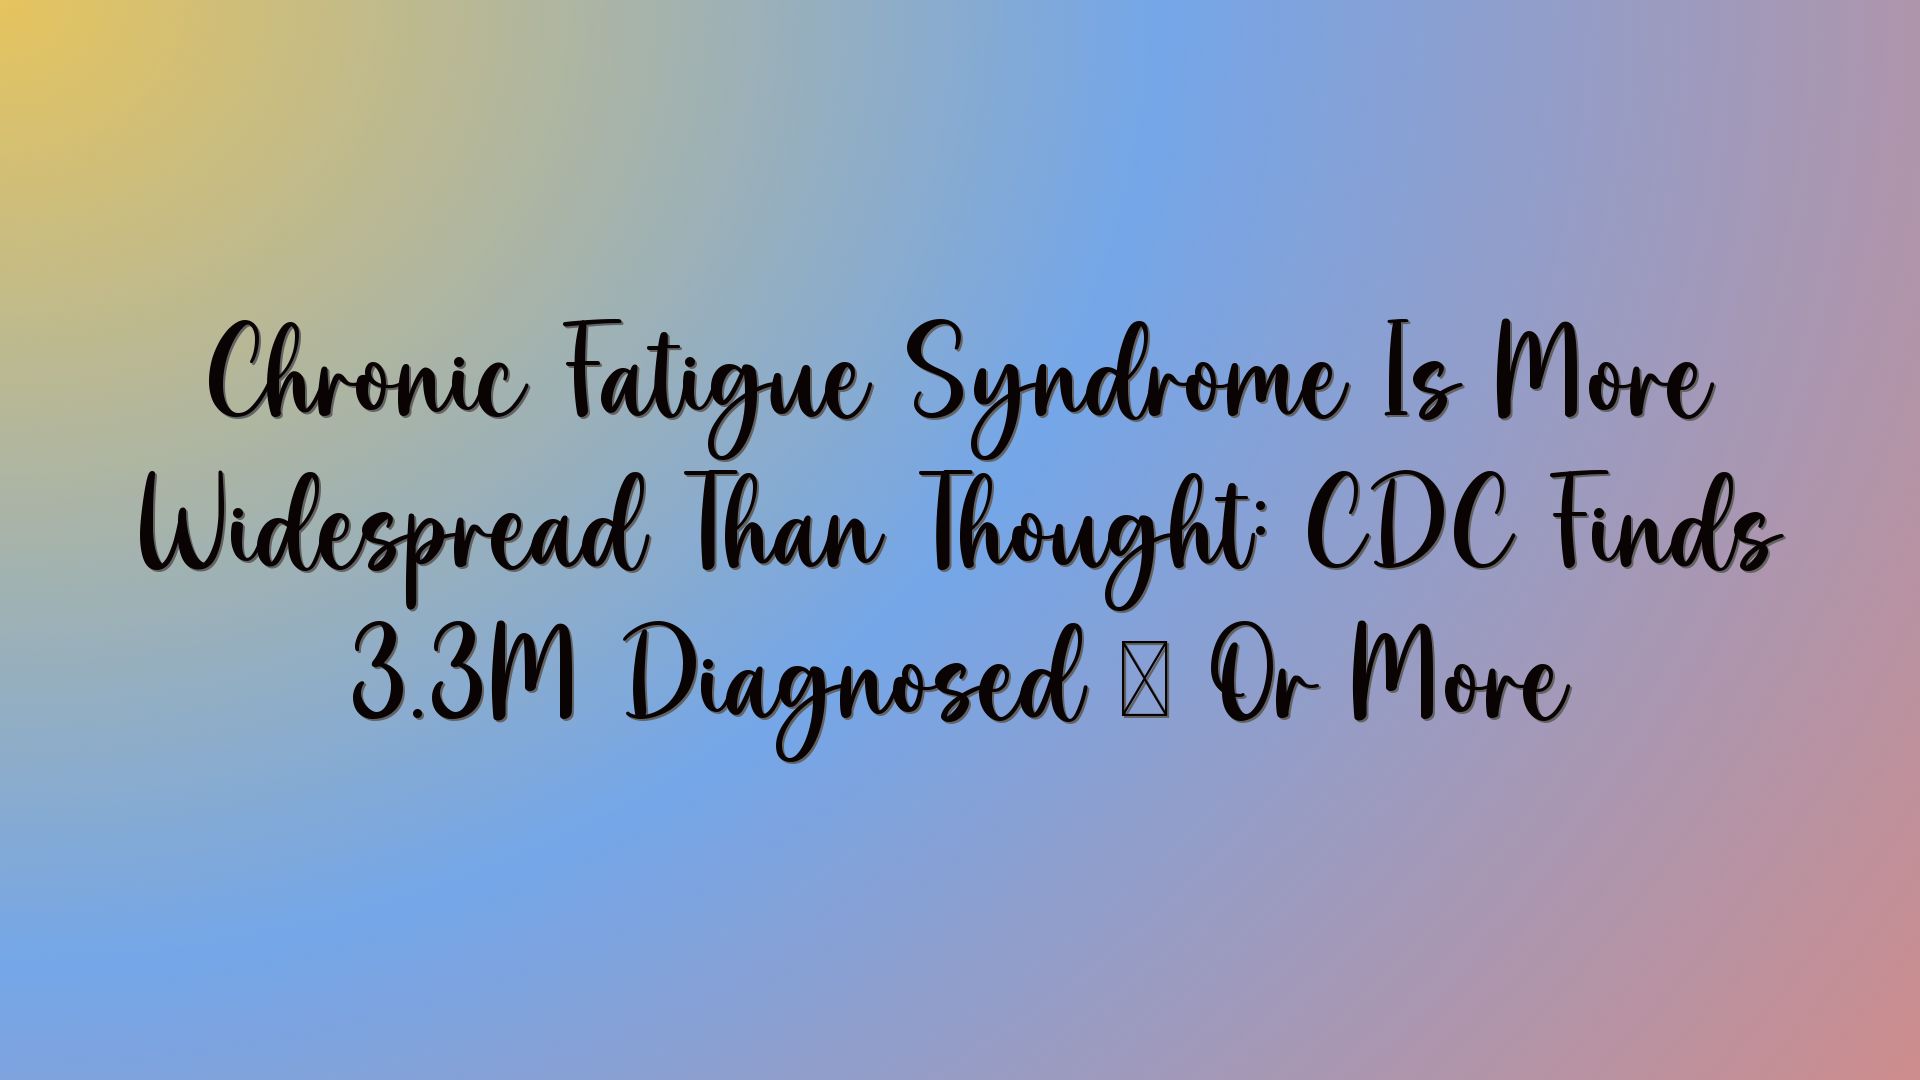 Chronic Fatigue Syndrome Is More Widespread Than Thought: CDC Finds 3.3M Diagnosed — Or More